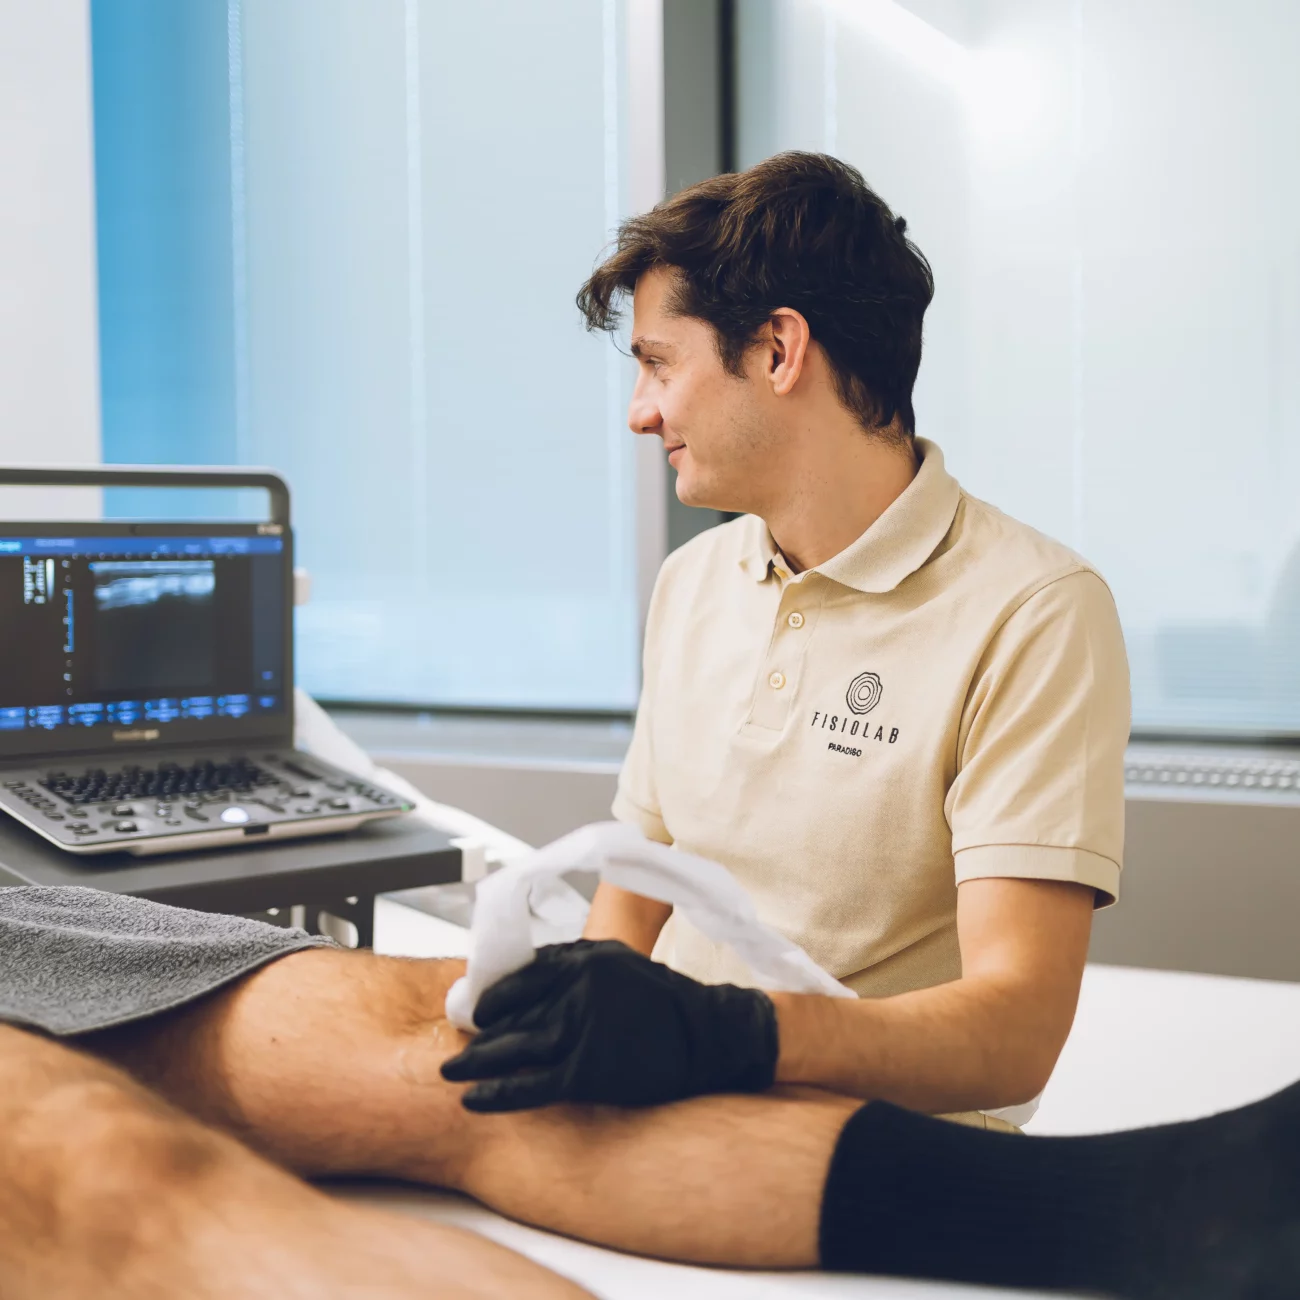 Ultrasound-guided physiotherapy in the Lugano area